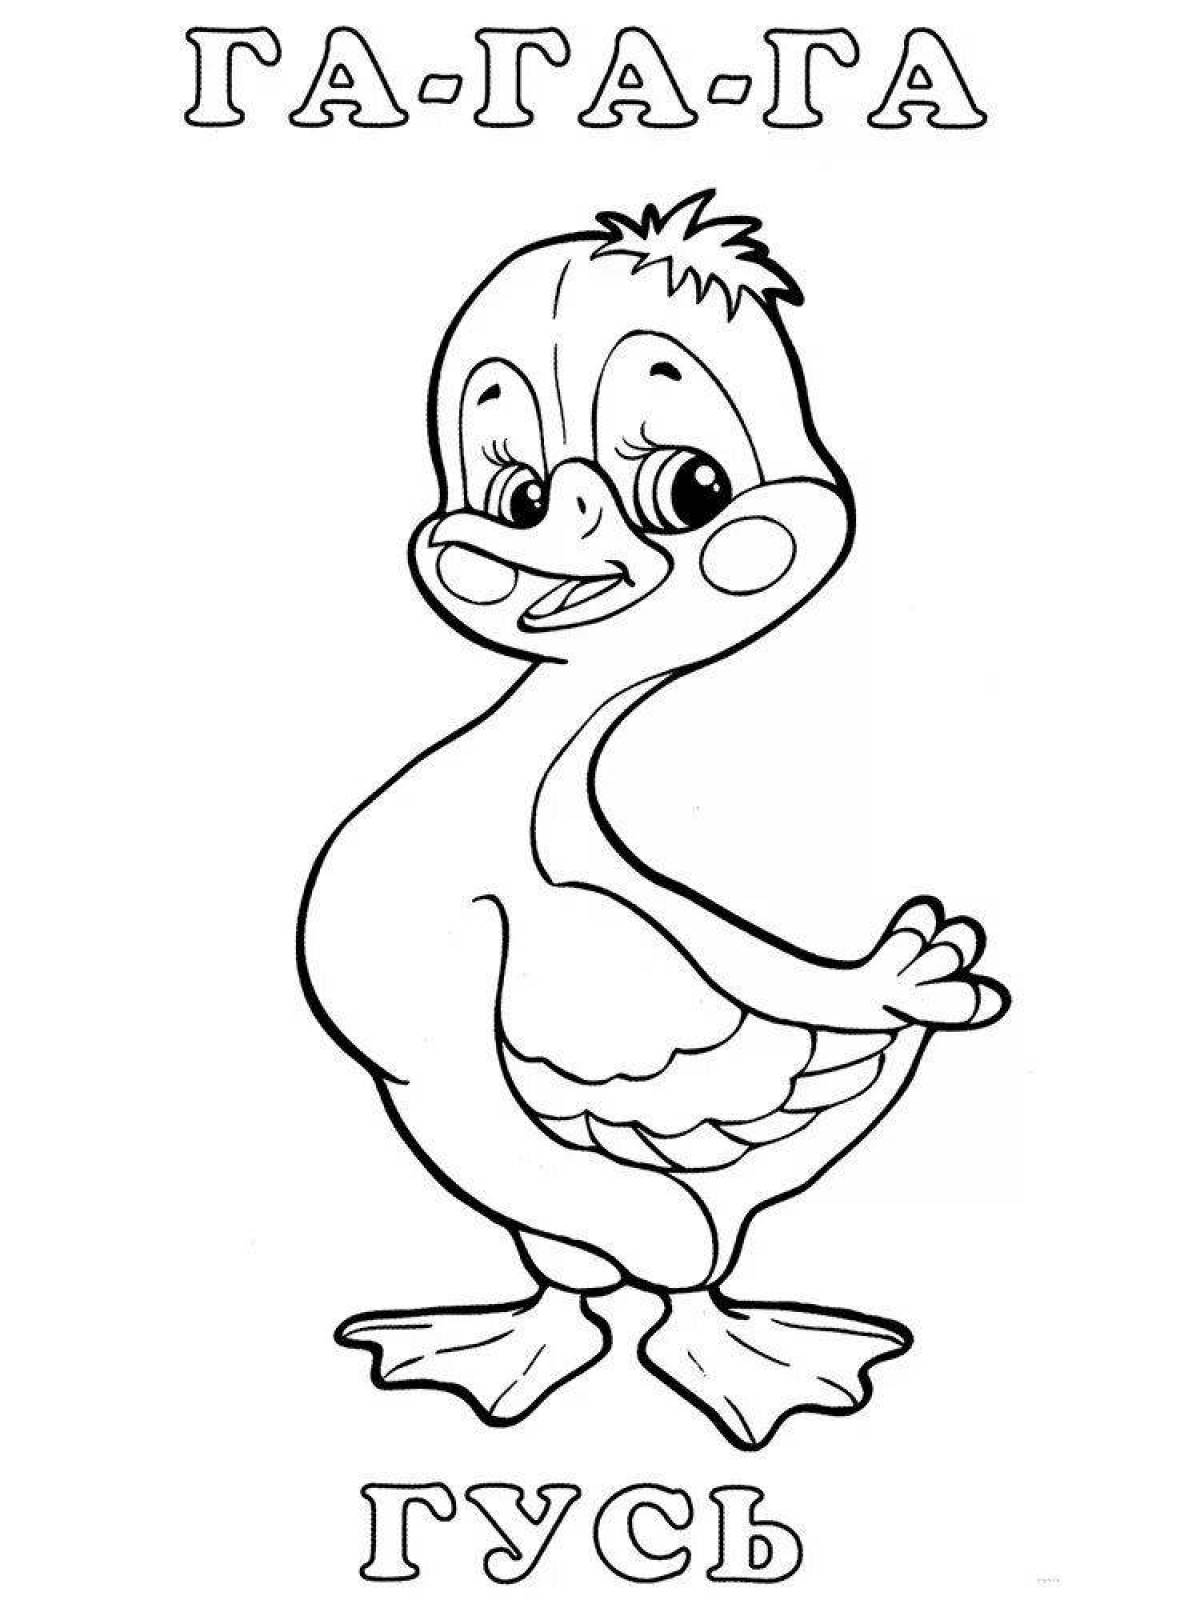 Bubble gosling coloring page